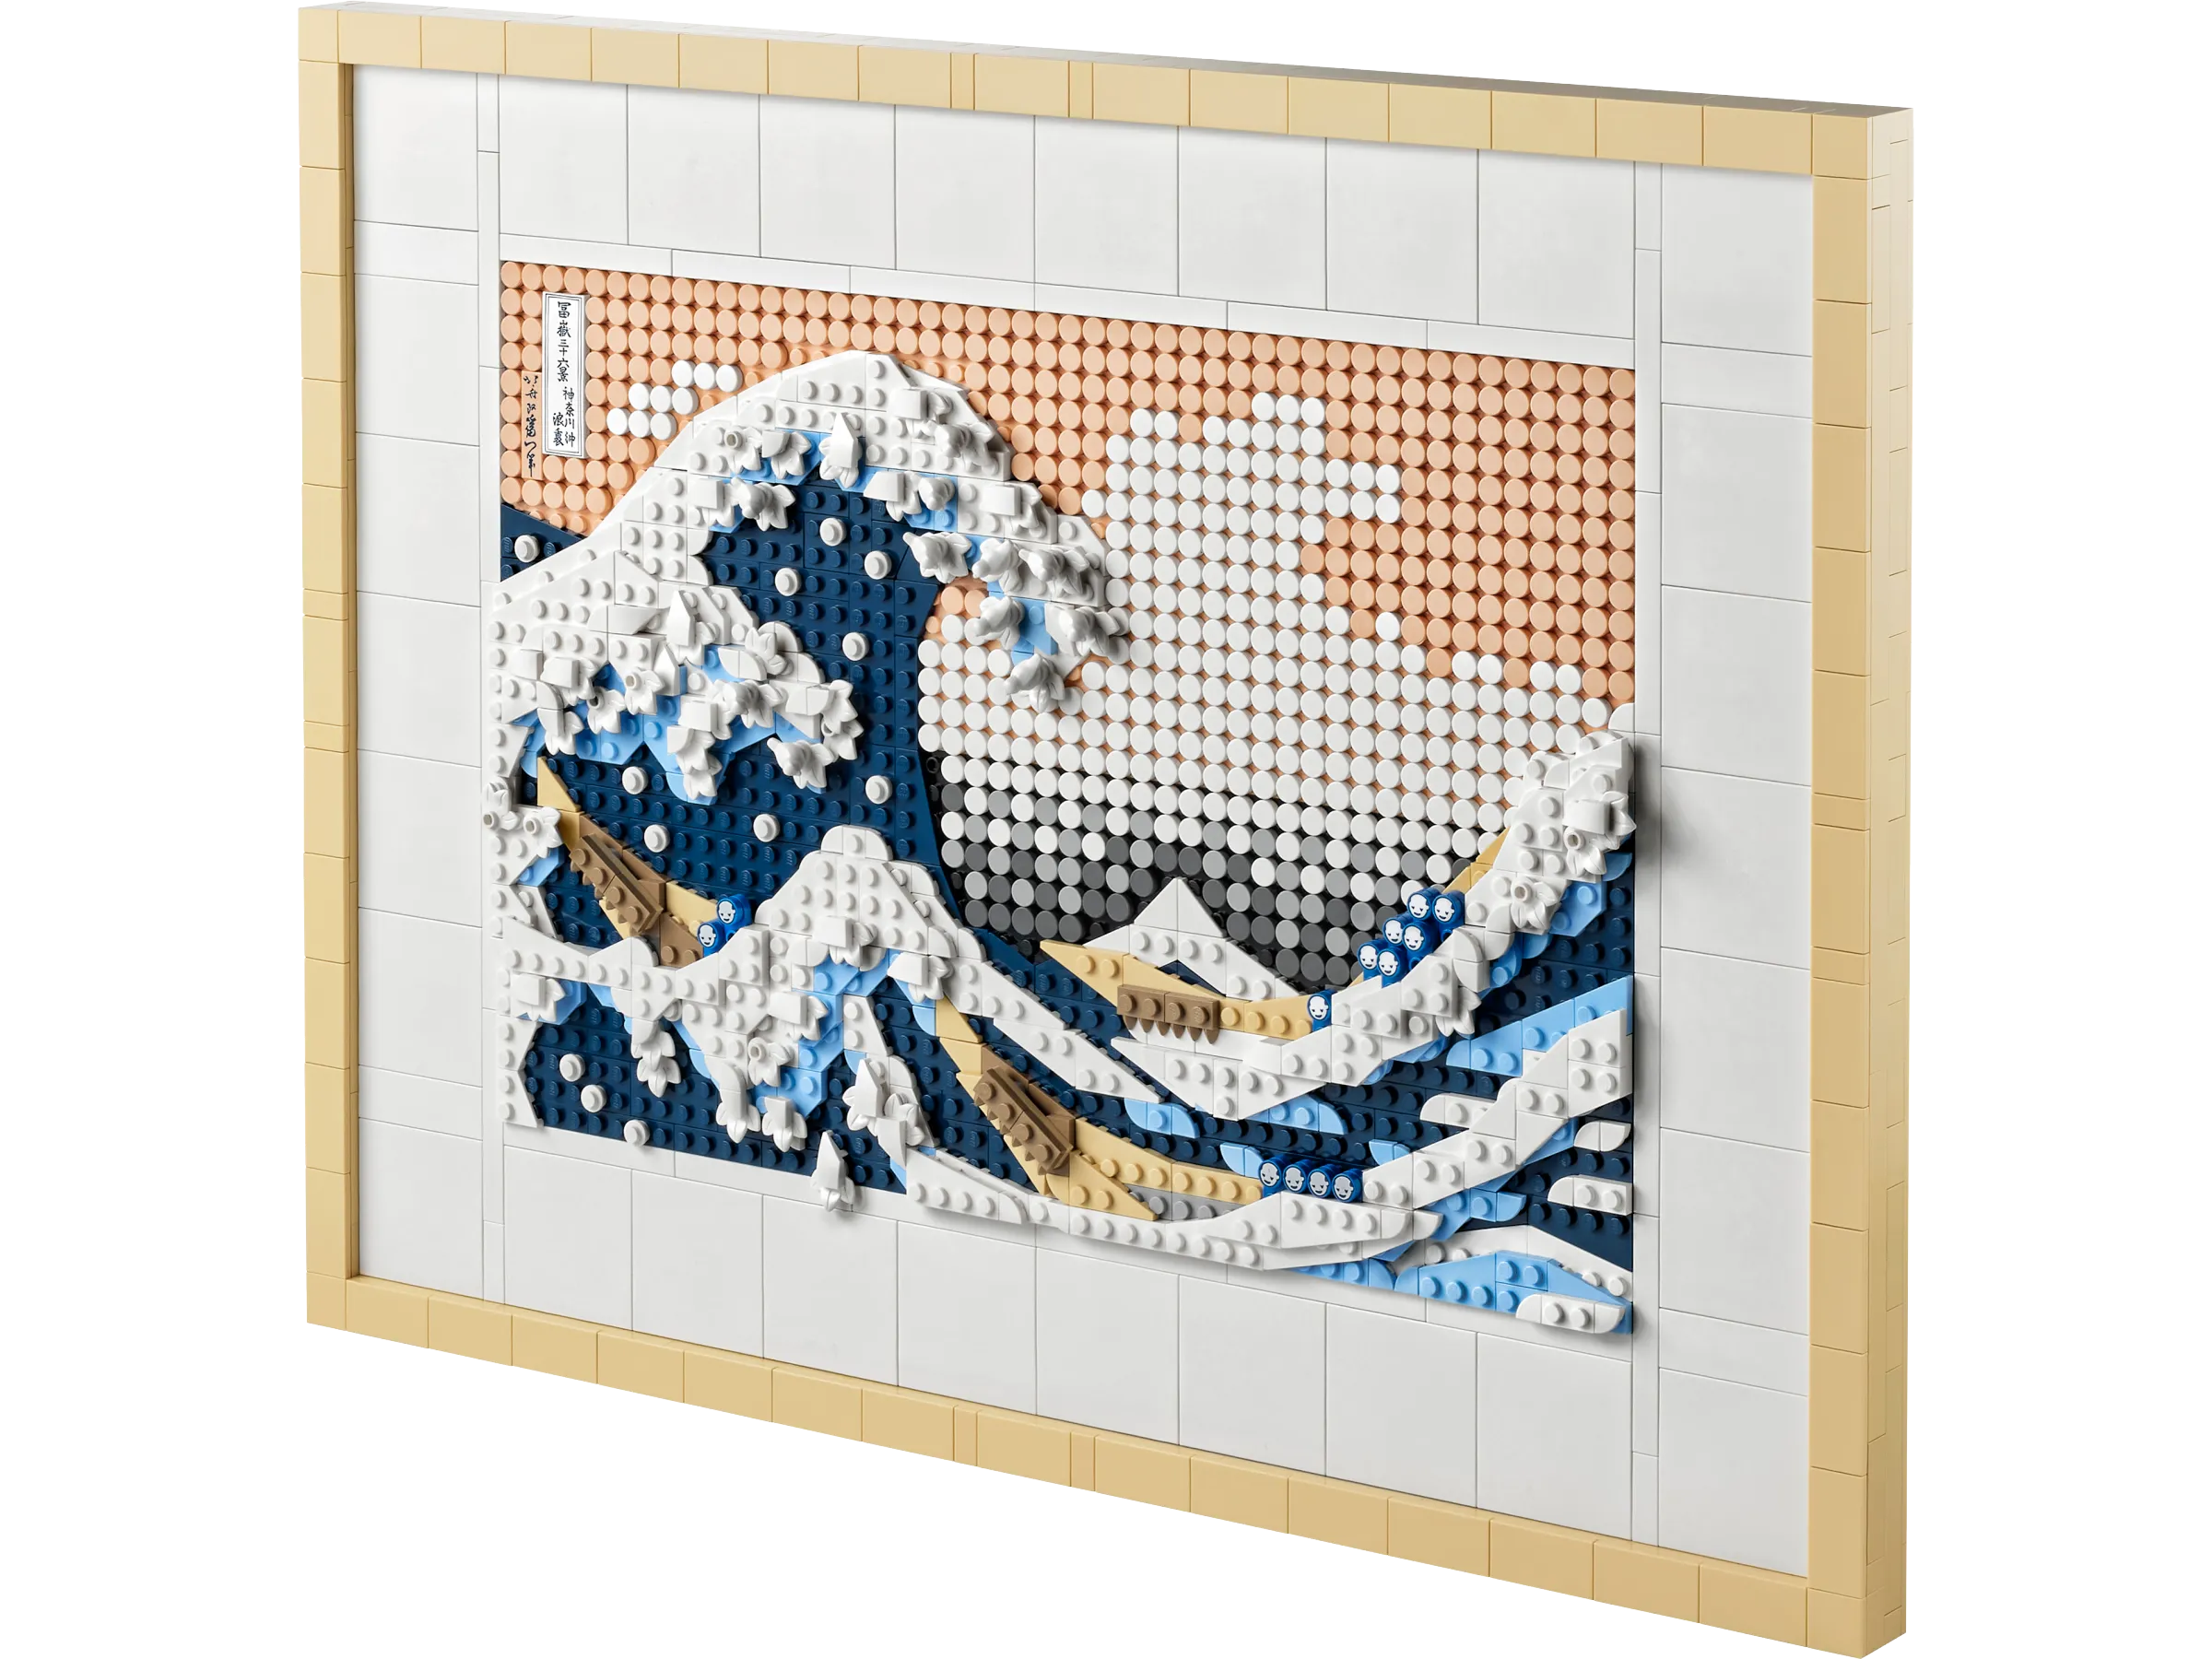 Art Hokusai – The Great Wave Gallery